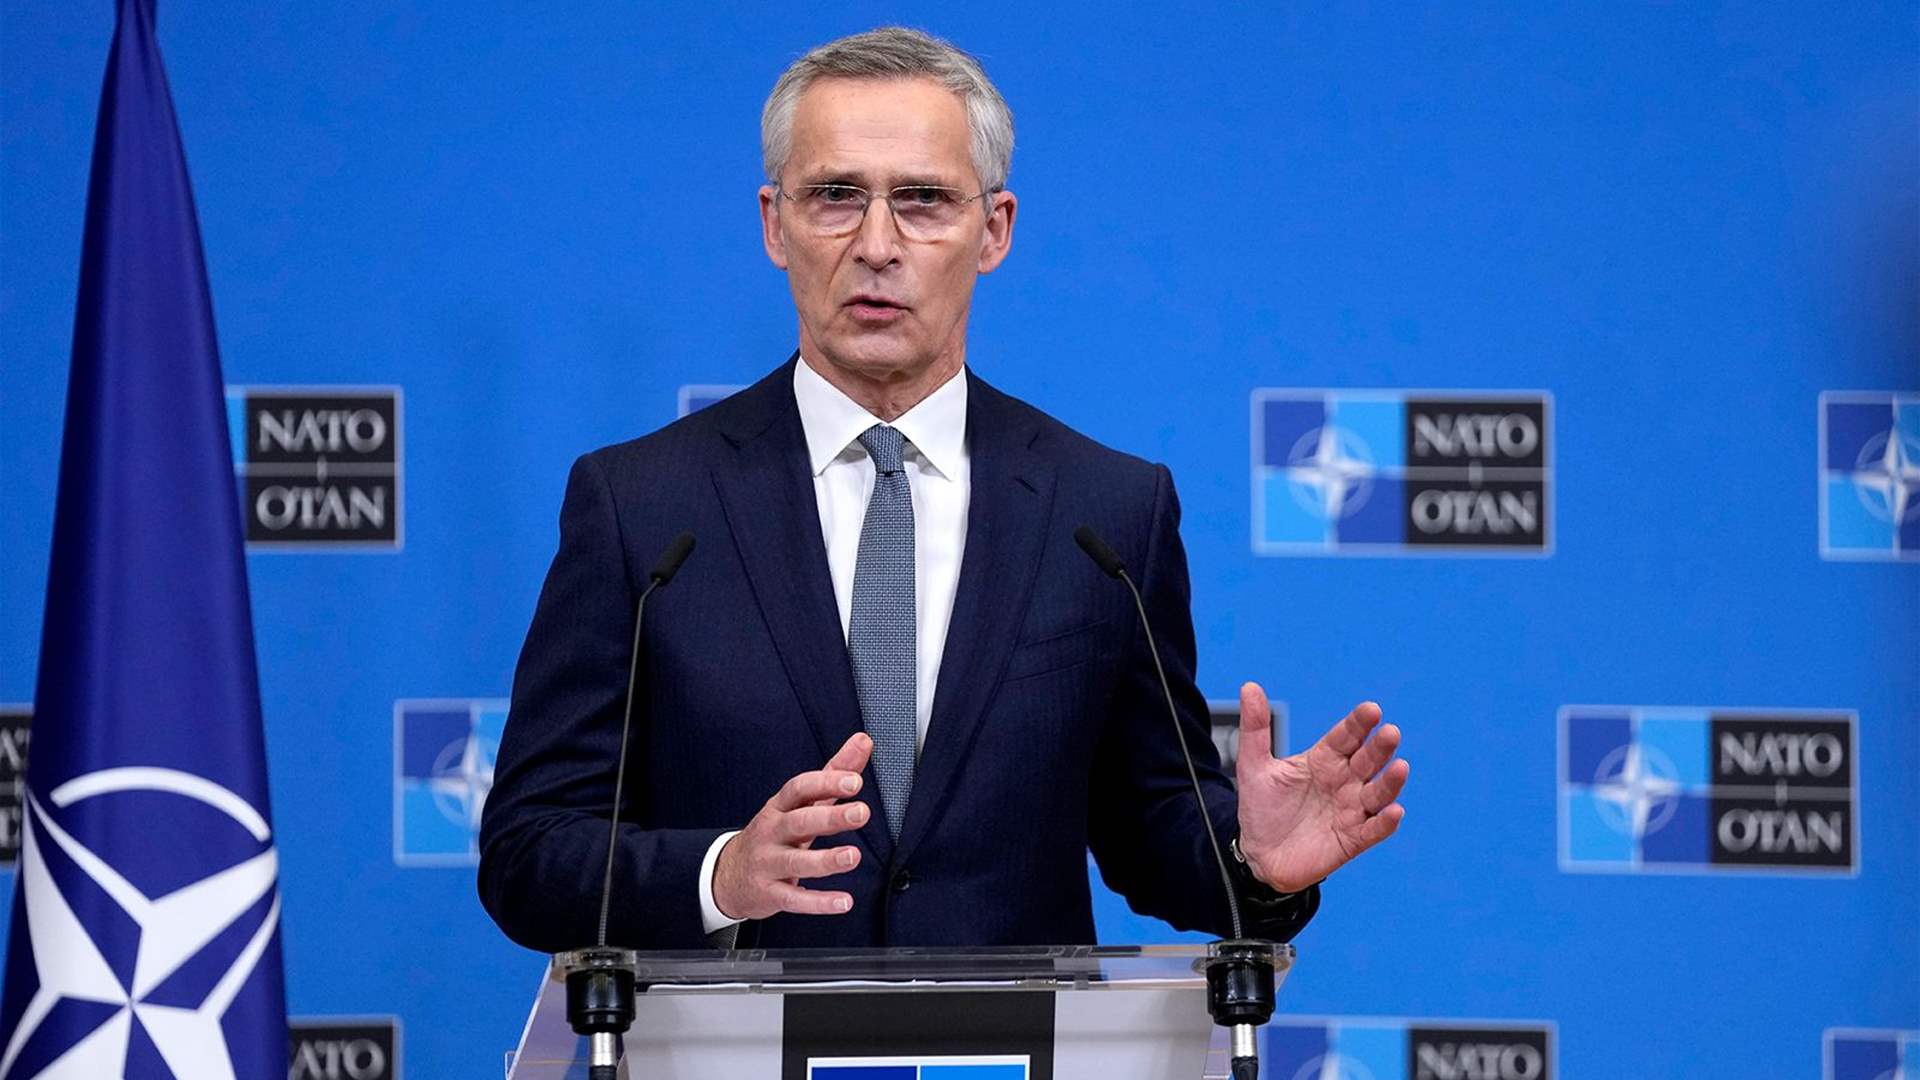 NATO chief Stoltenberg &#39;shocked&#39; by assassination attempt on Trump